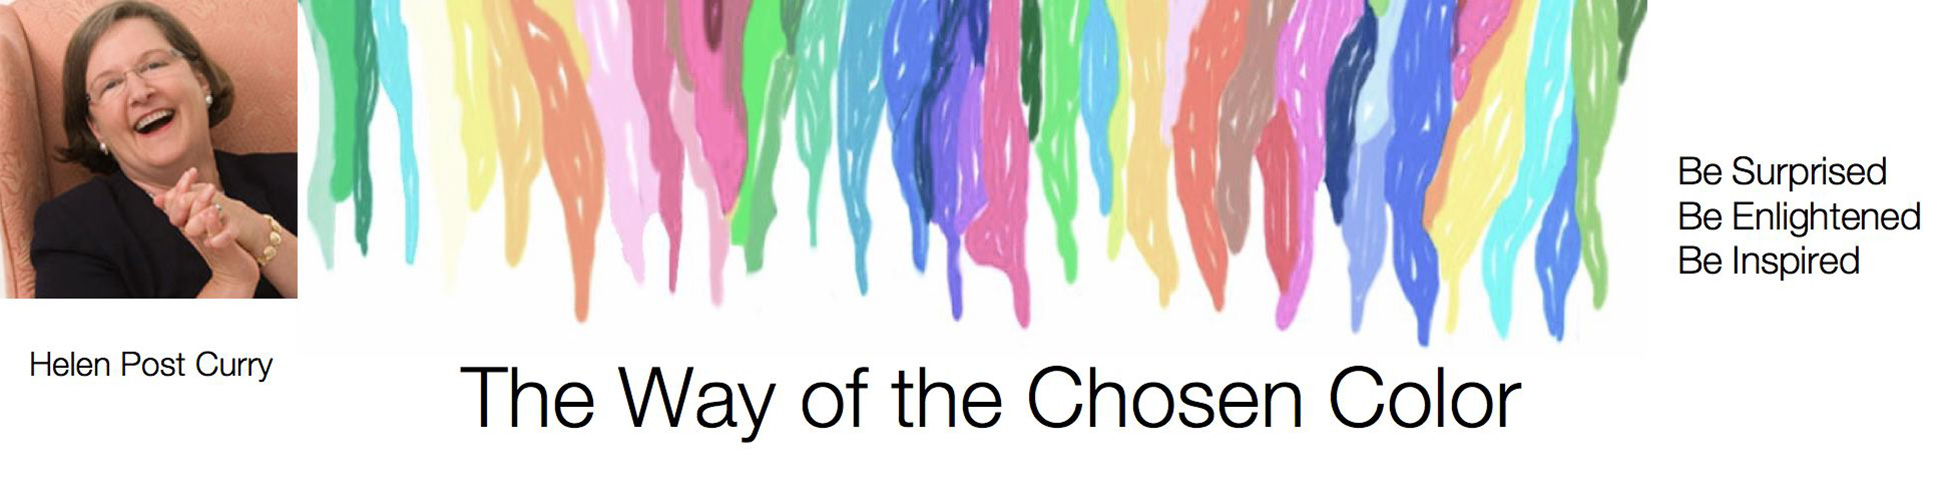 The Way of the Chosen Color